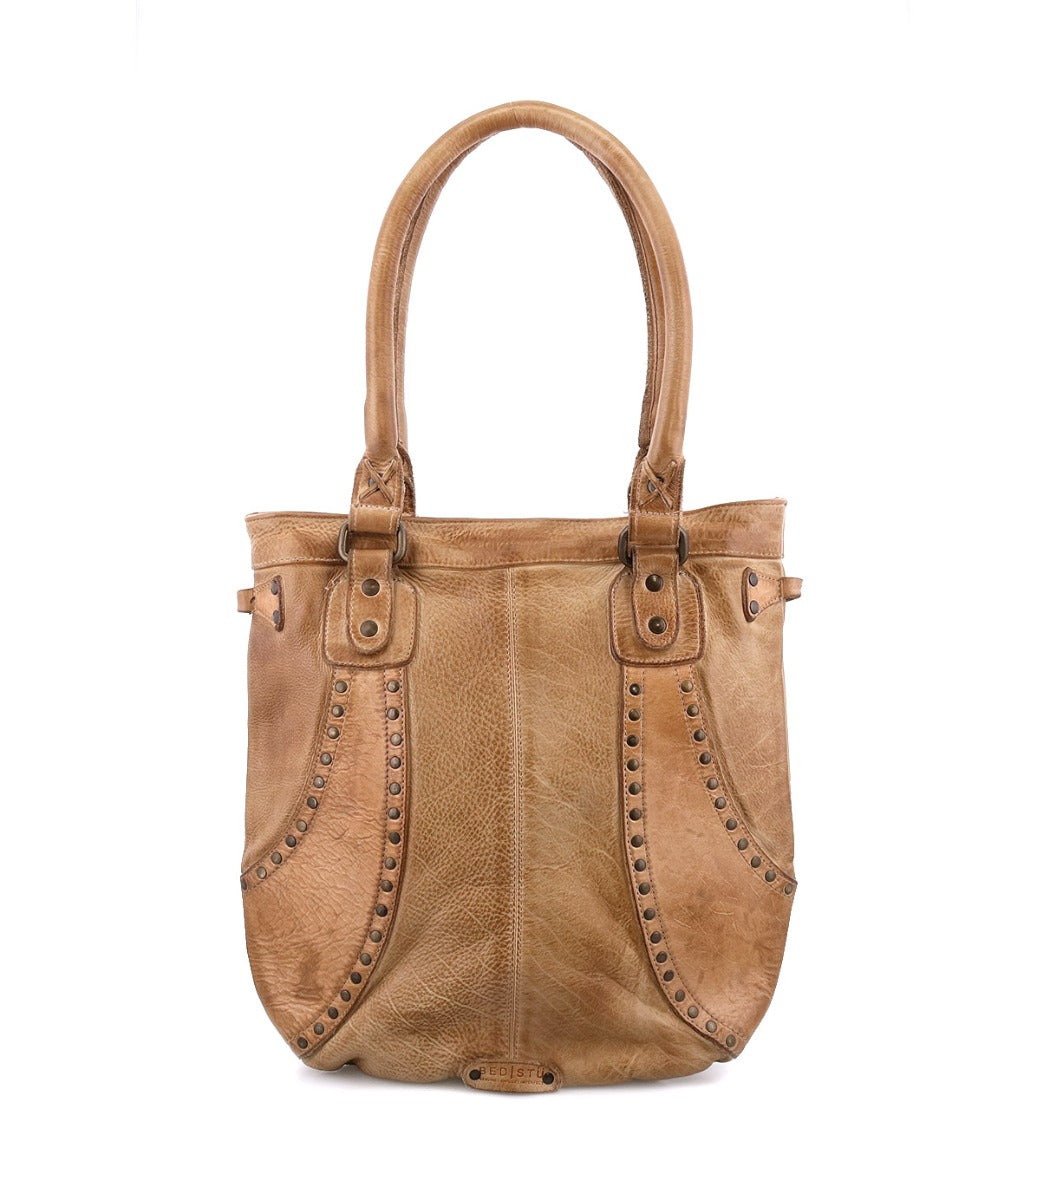 A Gala tan leather tote bag with rivets by Bed Stu.